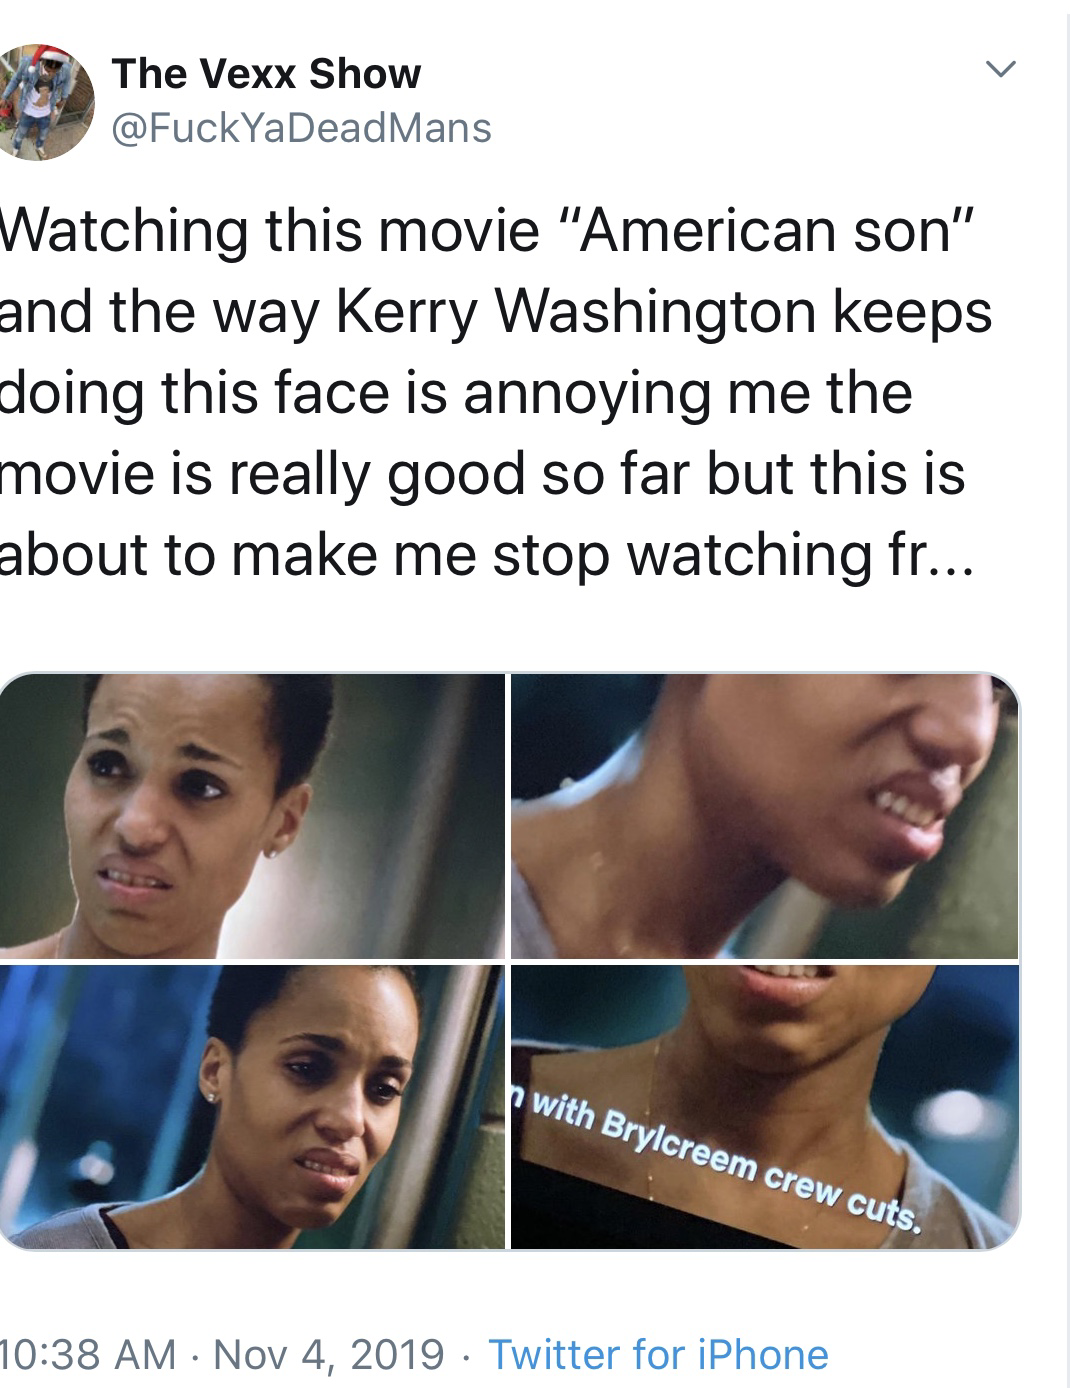 baby instructions - The Vexx Show Mans Watching this movie "American son" and the way Kerry Washington keeps doing this face is annoying me the movie is really good so far but this is about to make me stop watching fr... with Brylcreem crew cuts. Twitter 